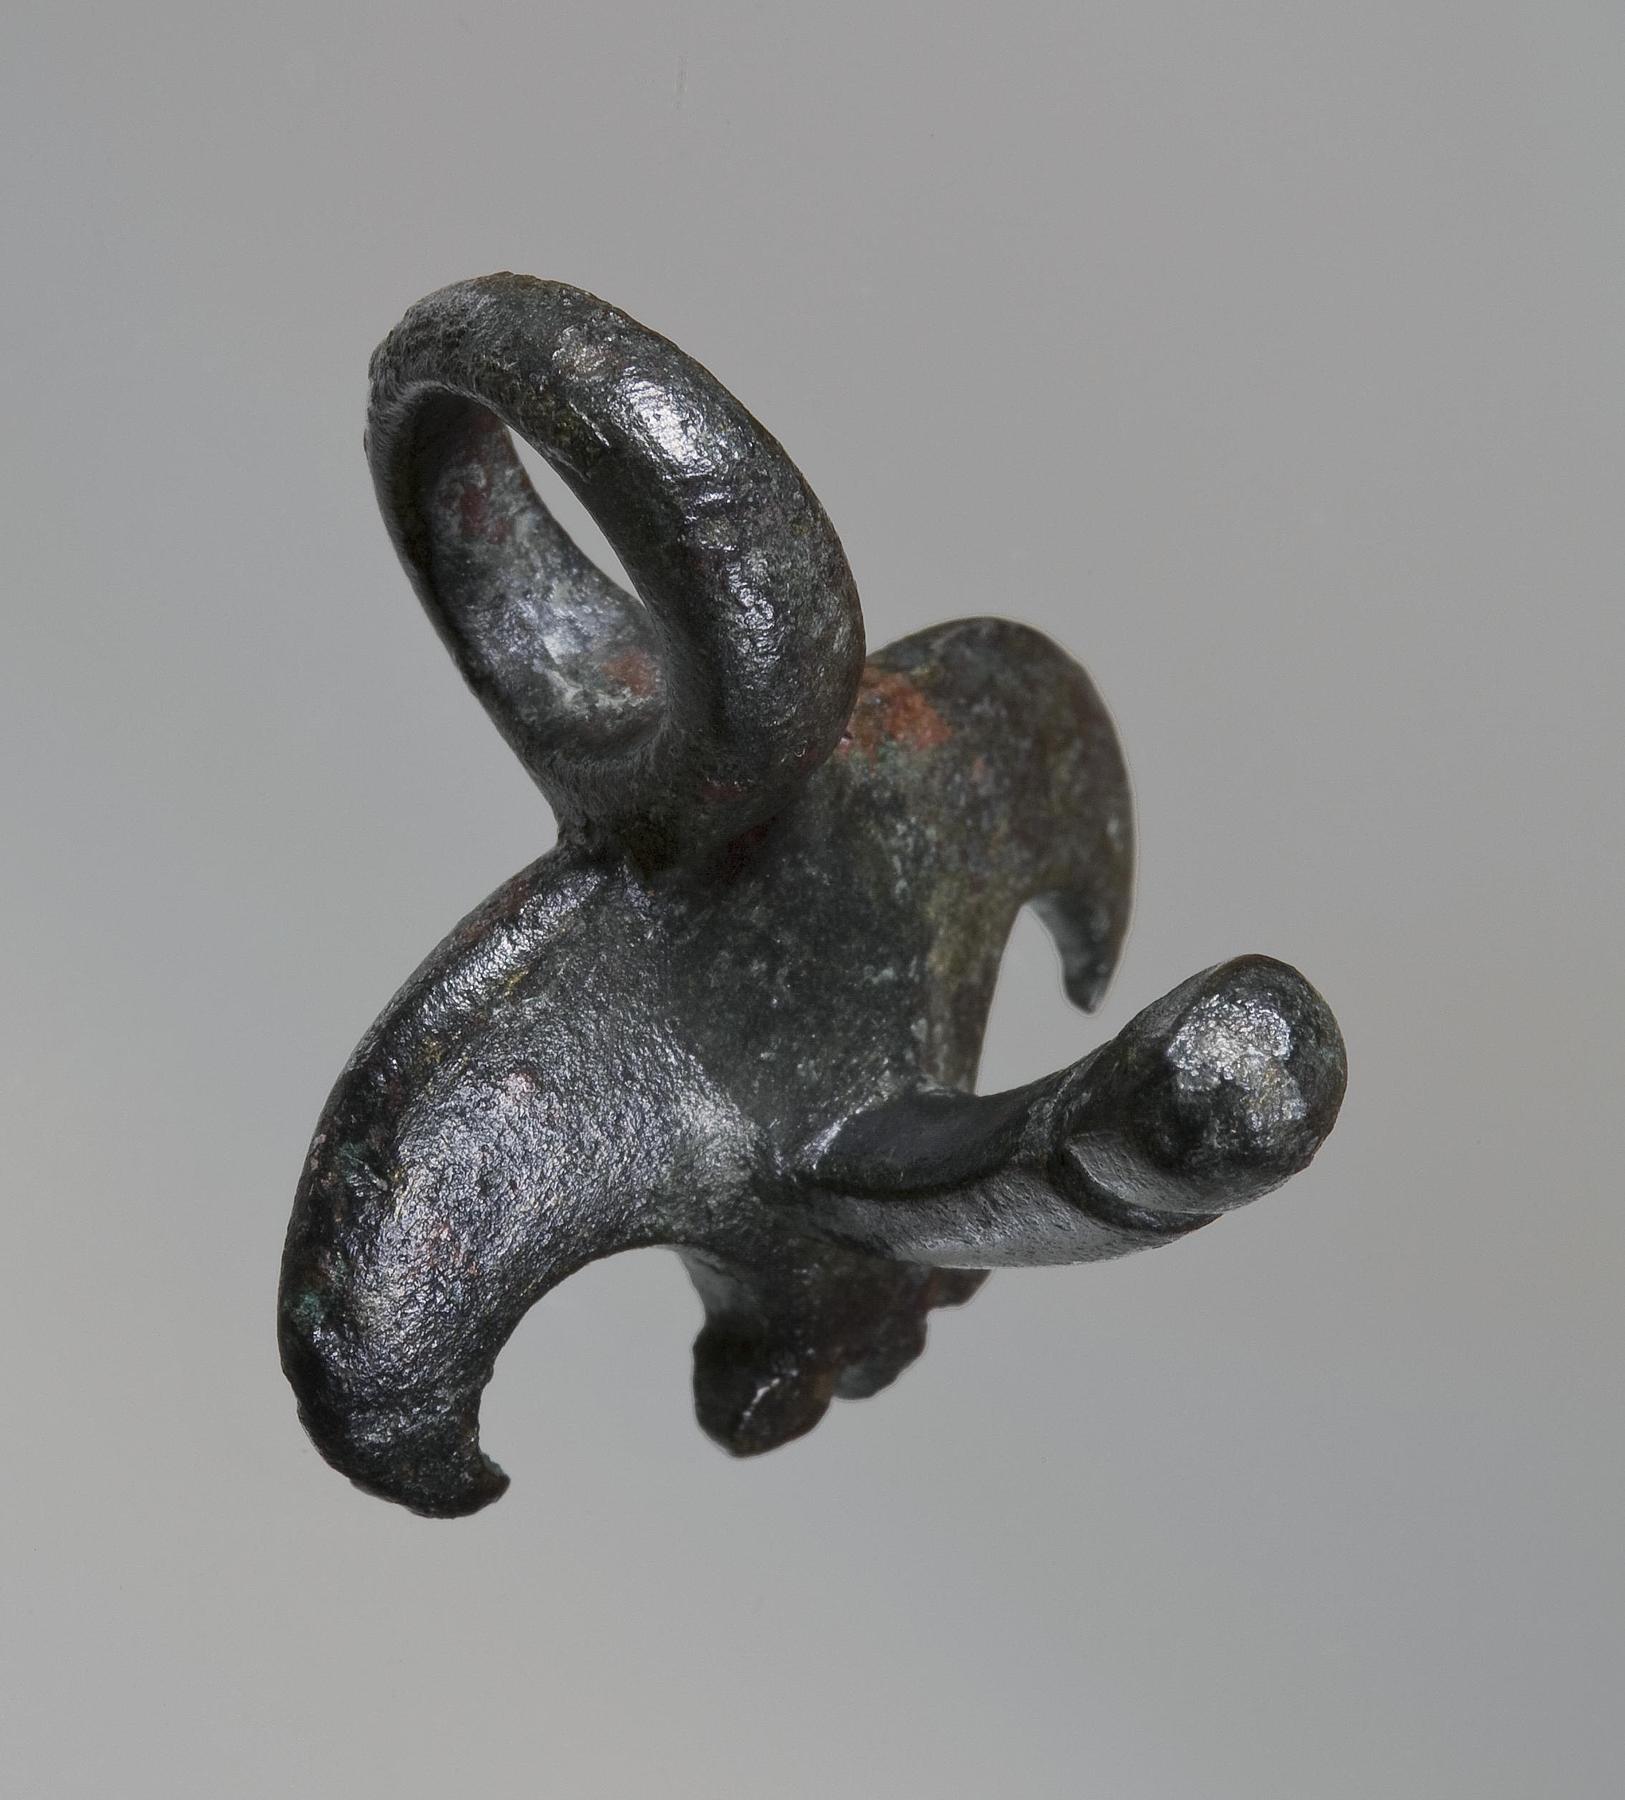 Attachment in the shape of a phallus, H2106